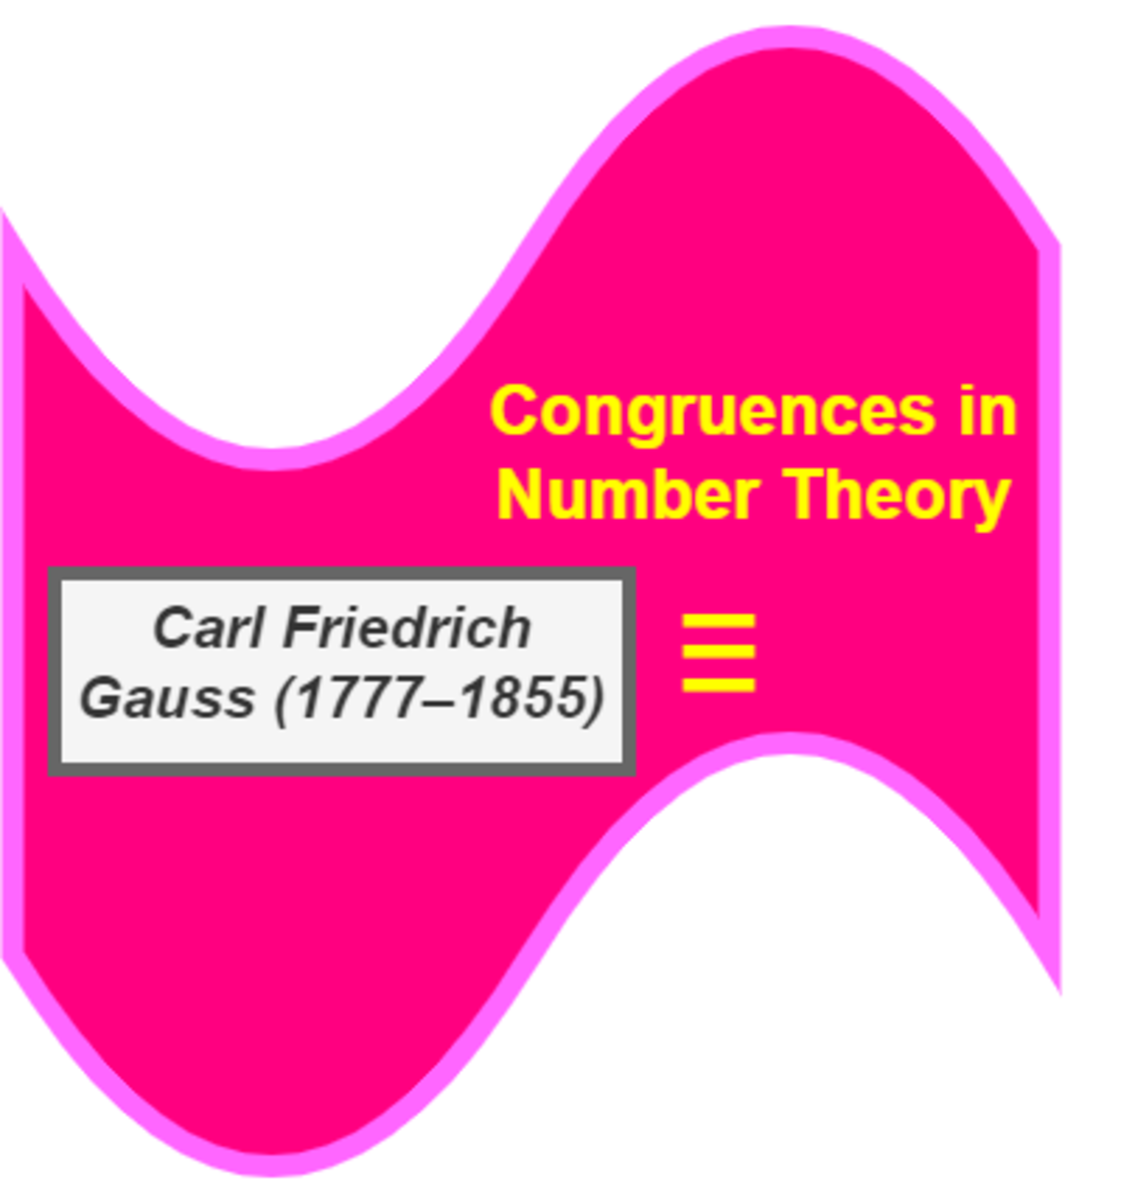 What Is the Concept of Congruences in Number Theory?